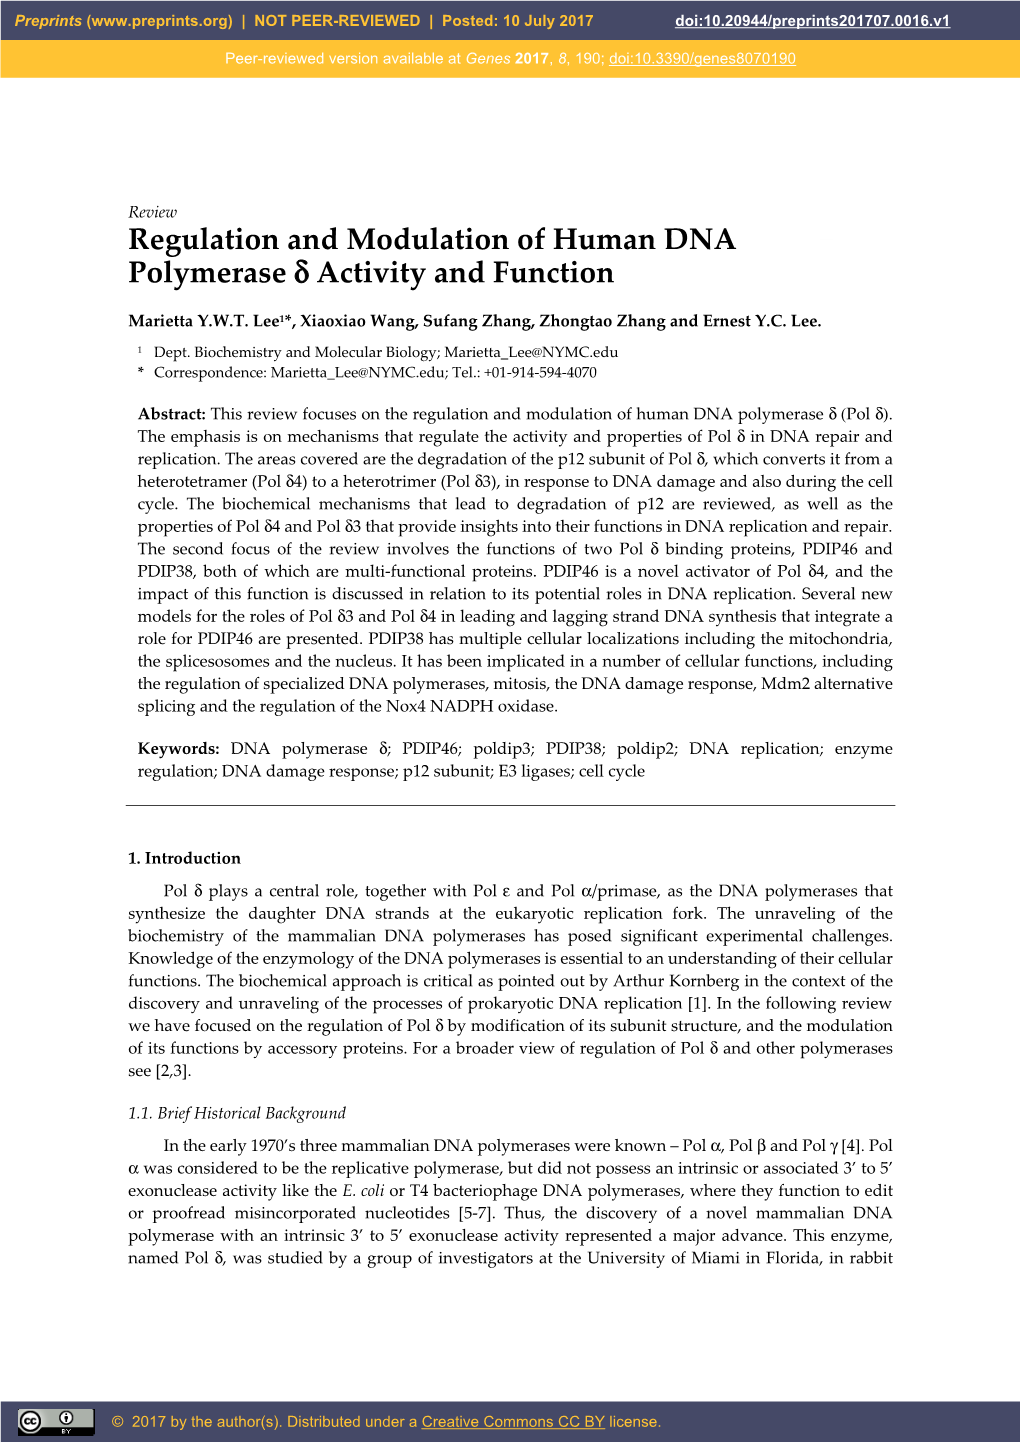 Regulation and Modulation of Human DNA Polymerase Δ Activity and Function